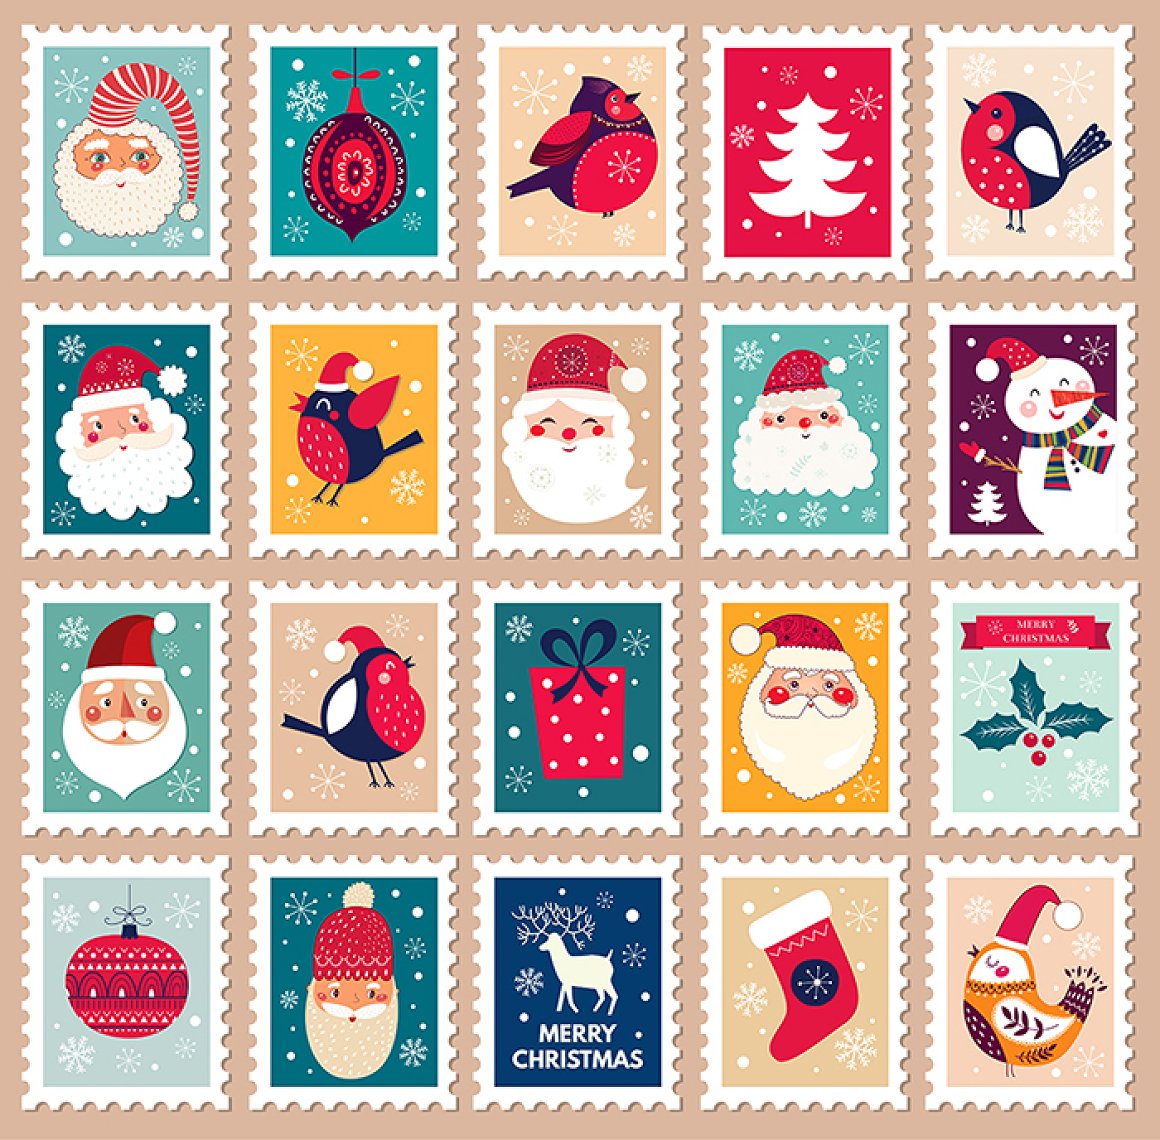 Cool postage collection in a Christmas style.